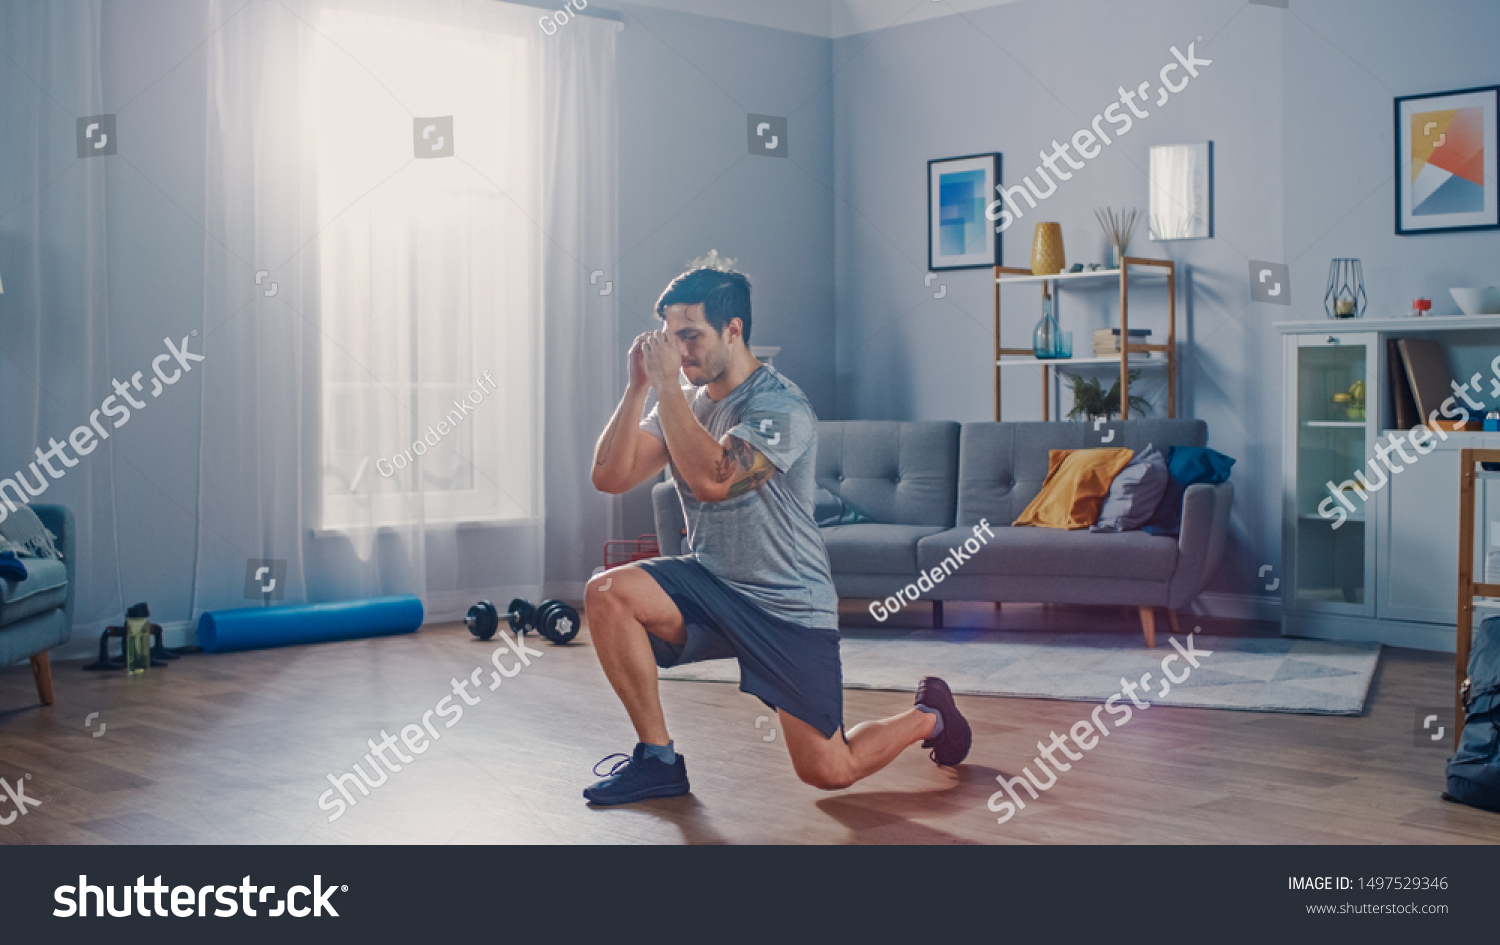 Strong Athletic Fit Man in T-shirt and Shorts is Doing Forward Lunge Exercises at Home in His Spacious and Bright Apartment with Minimalistic Interior. #1497529346